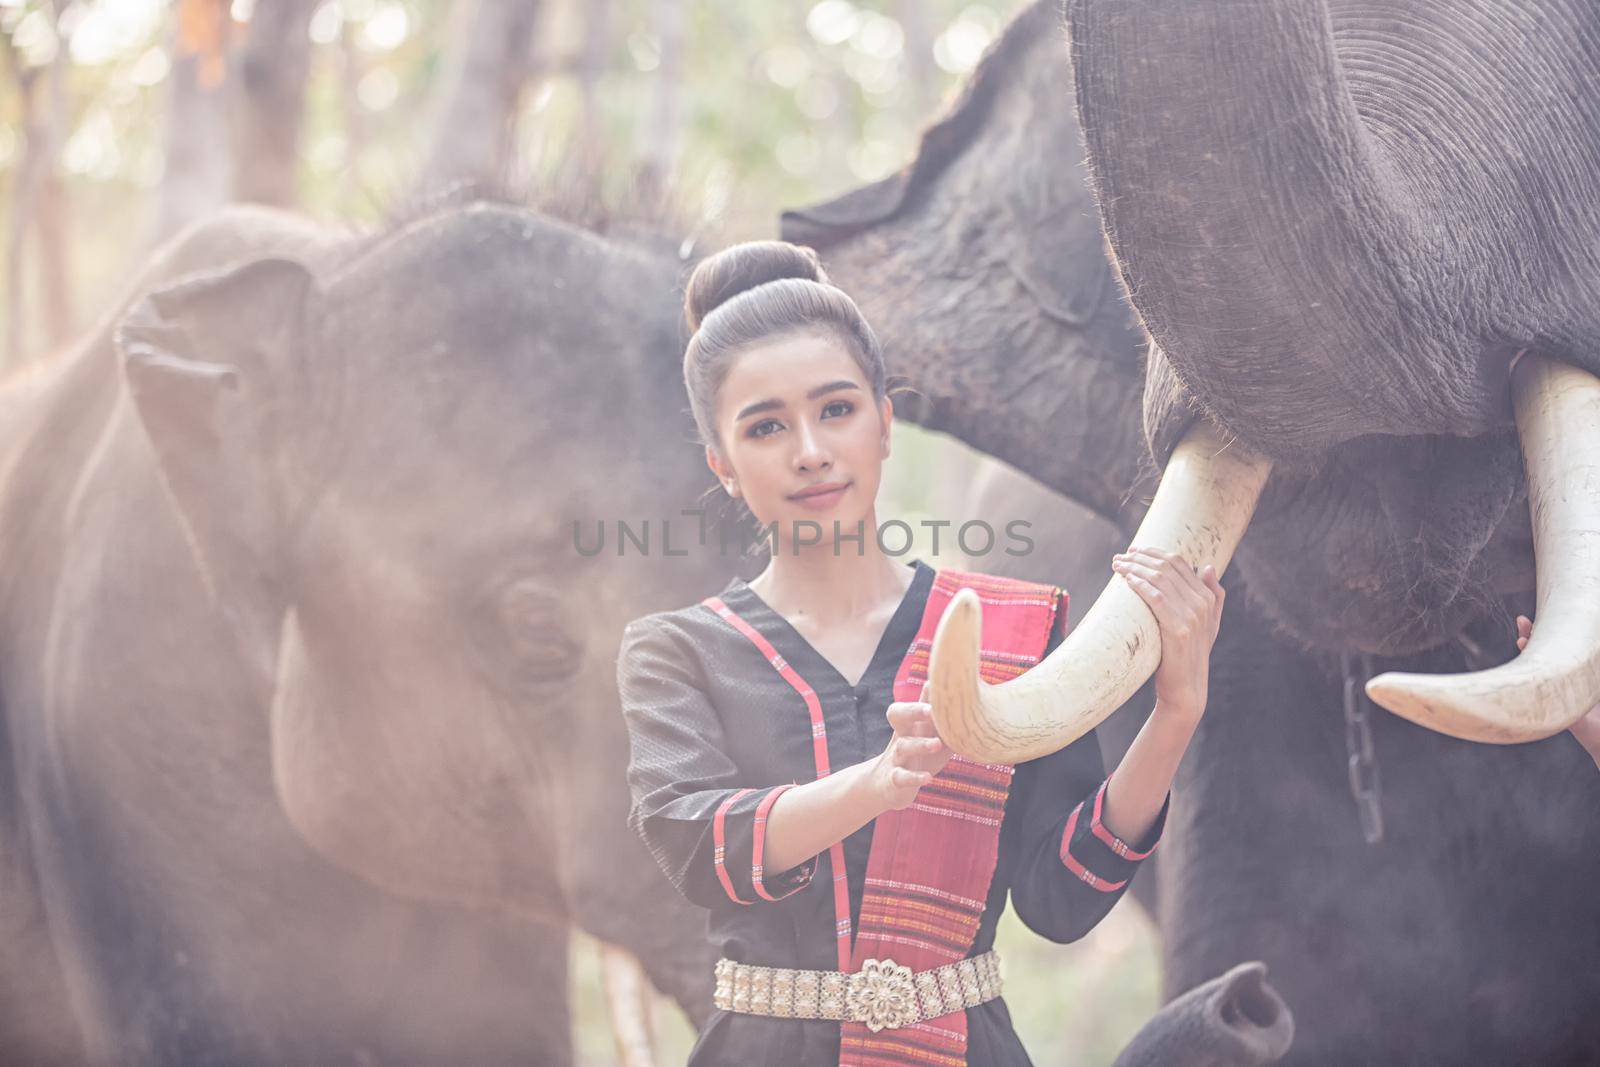 Spirit of Asia,Thailand Countryside; Farmer and elephant on the background of sunrise. Asian culture by chuanchai